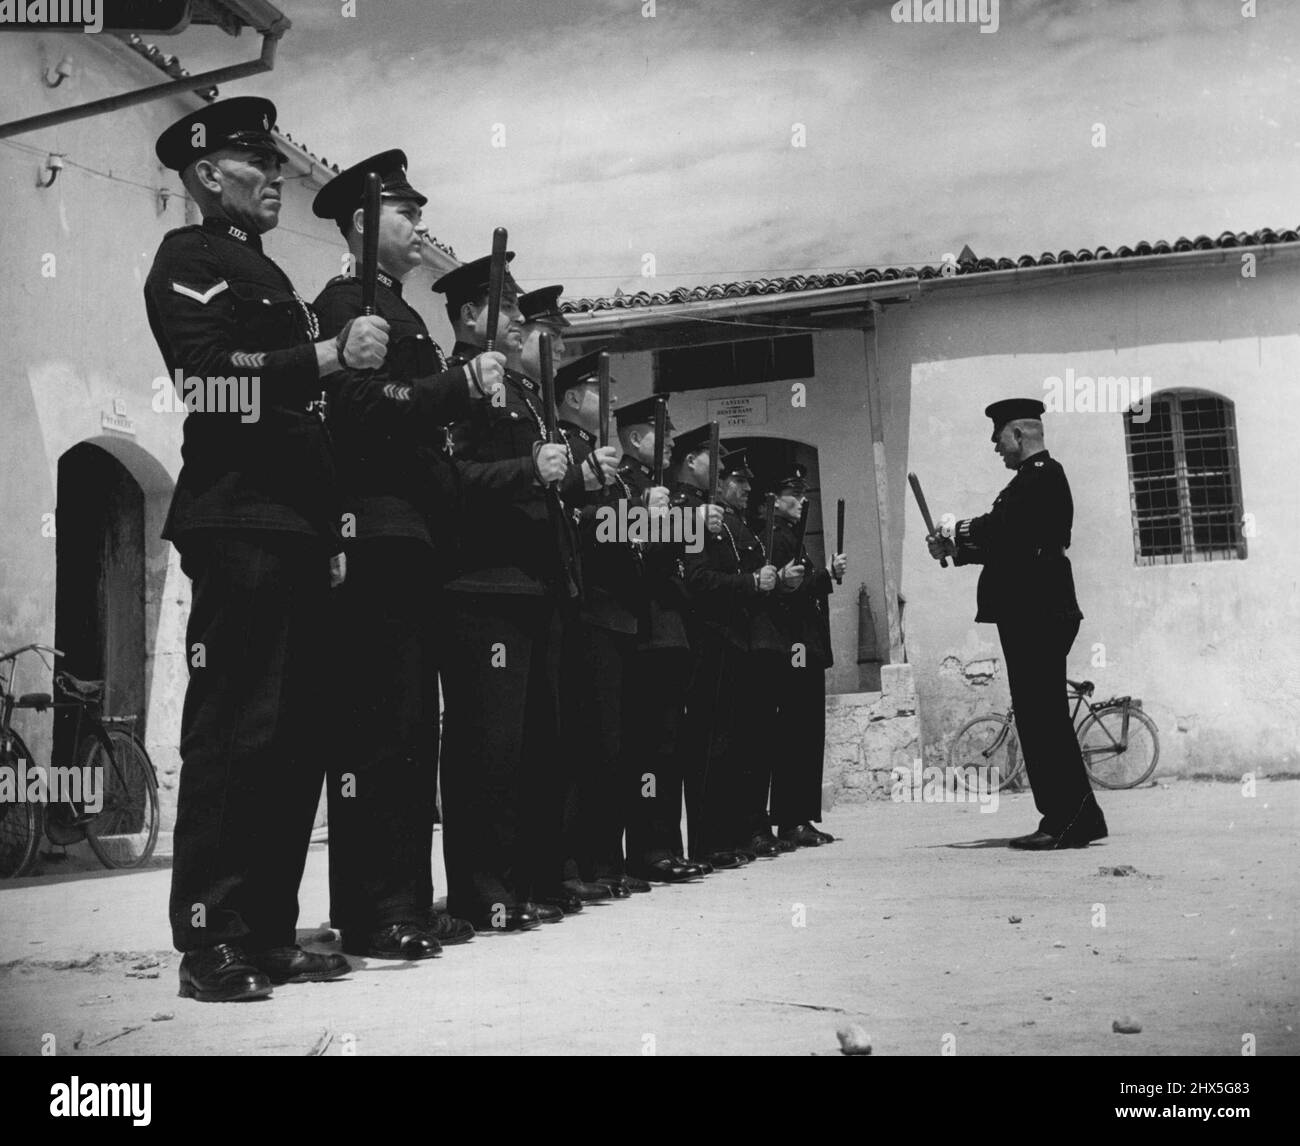 Cyprus Police. Truncheon inspection at the Nicosia Divisional H.Q. July 1, 1951. (Photo by British Official Photograph). Stock Photo